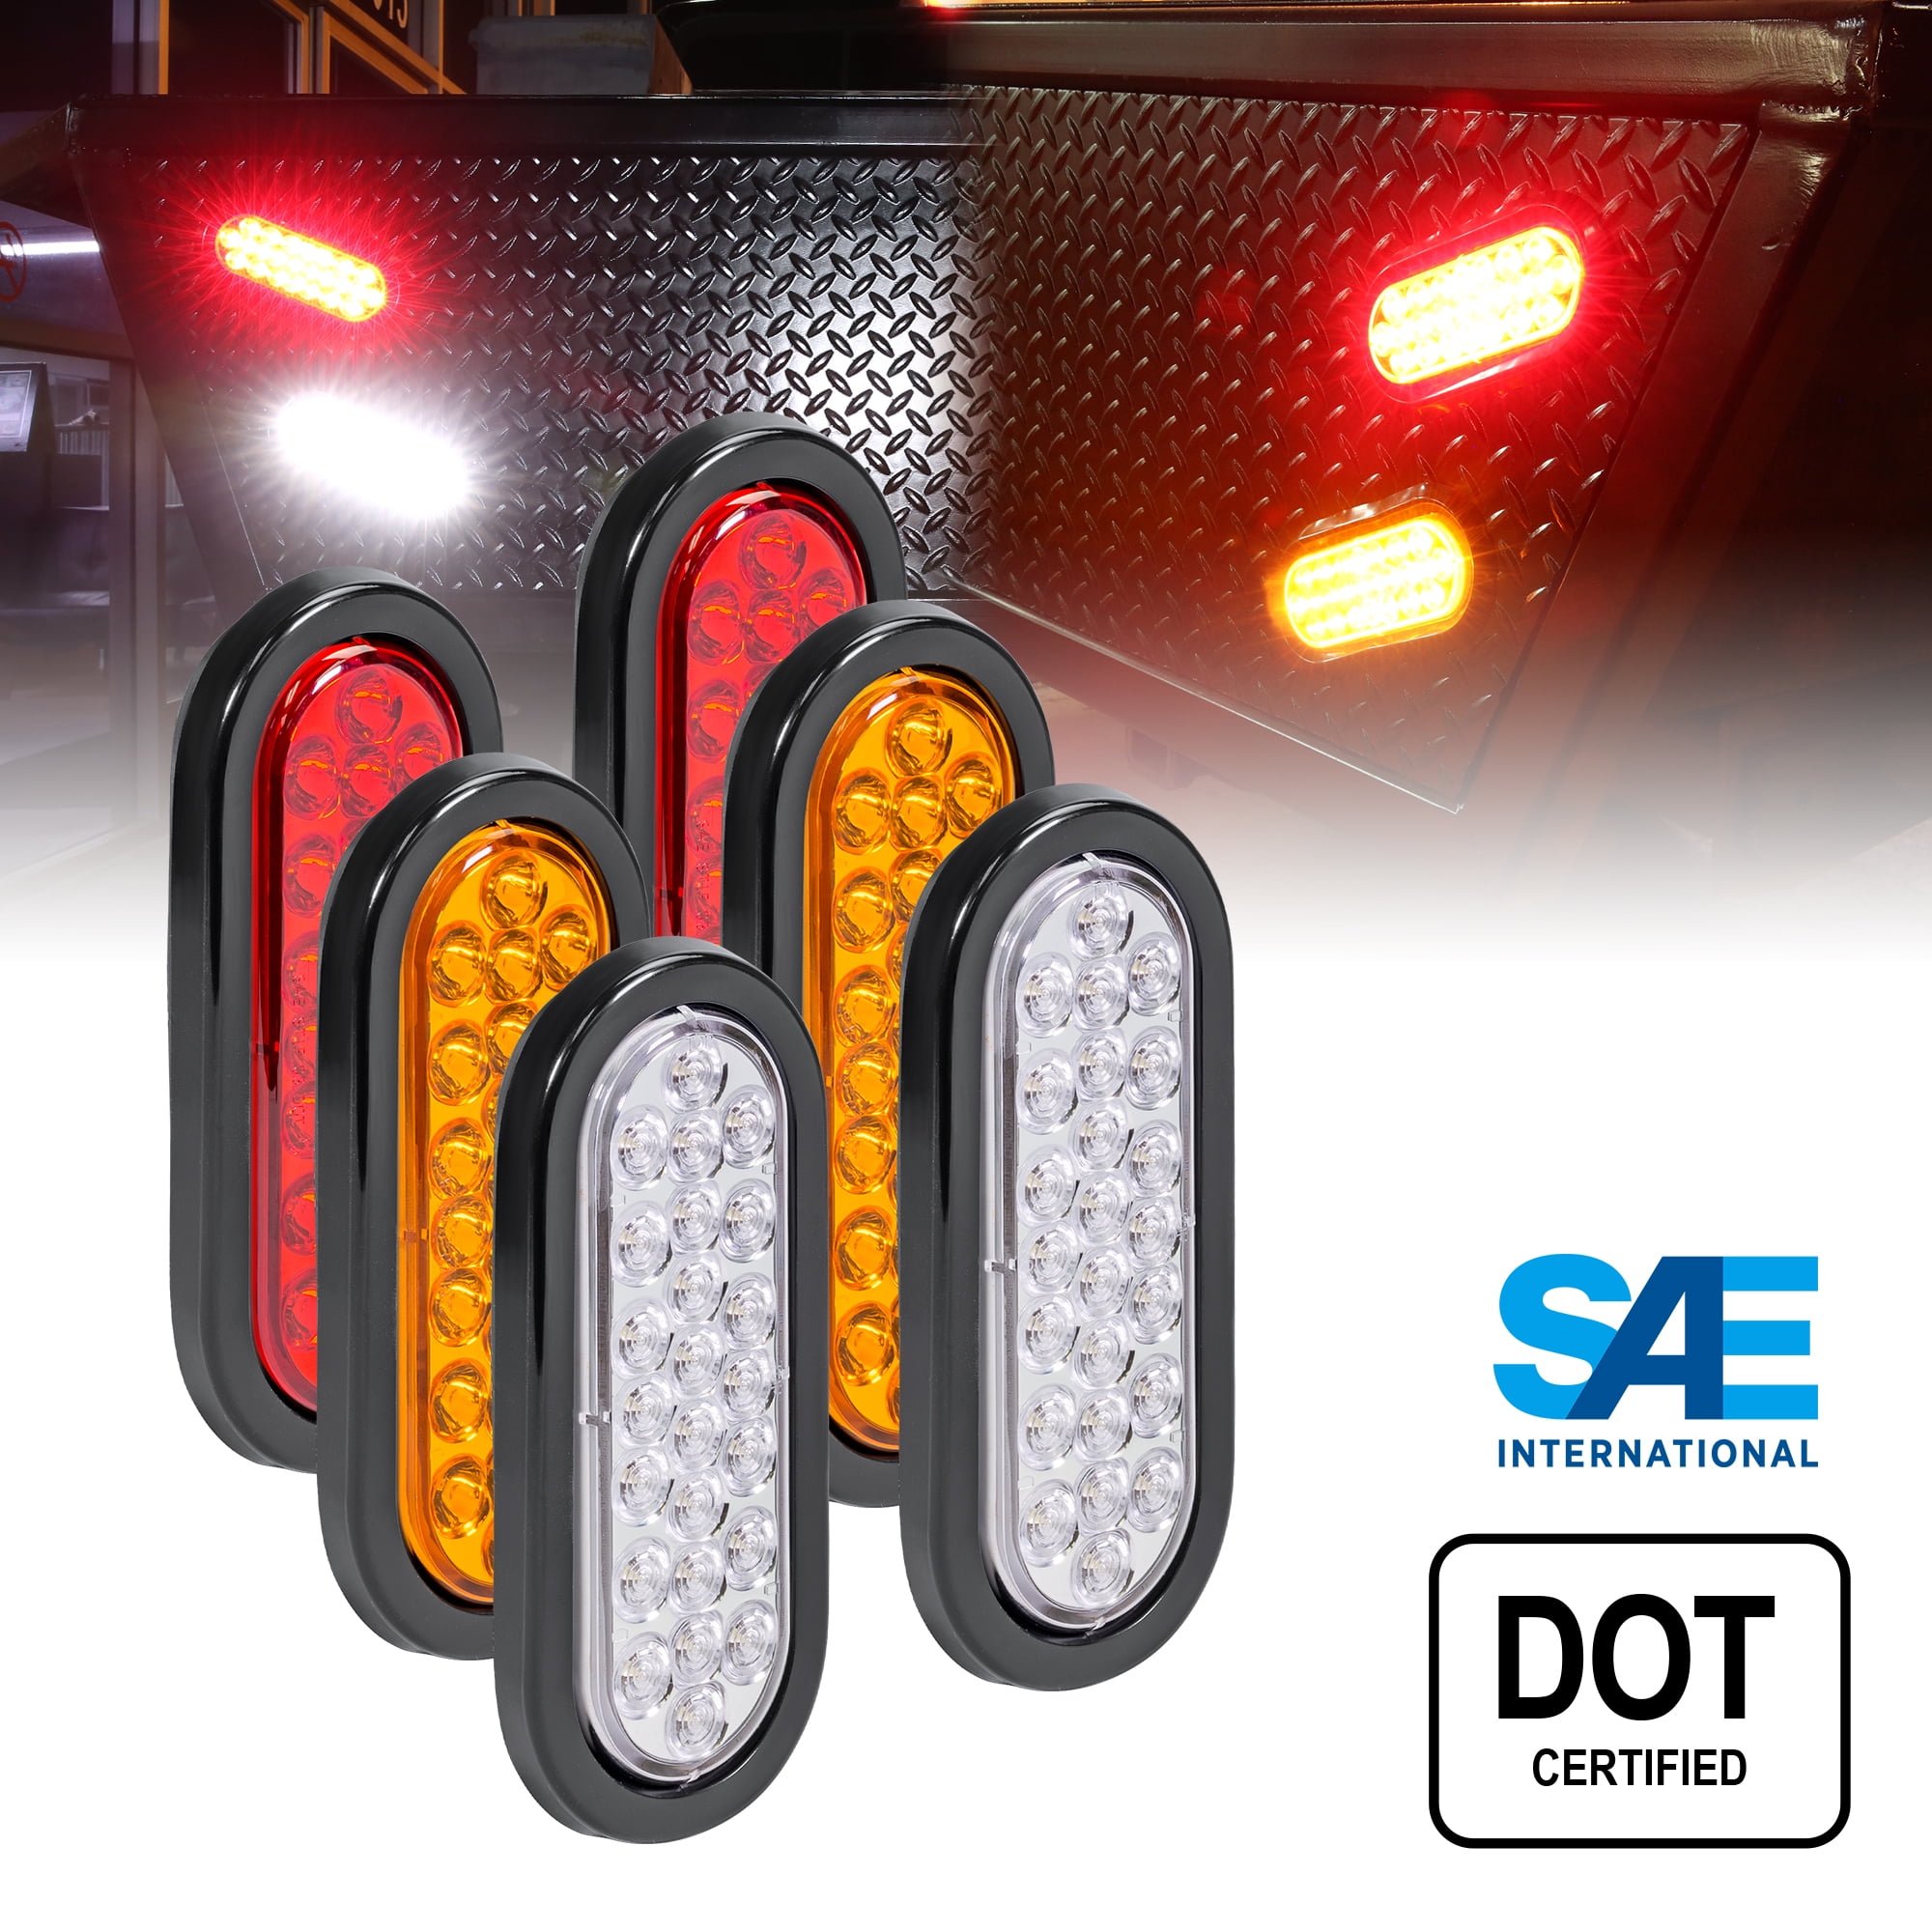 IP68 Waterproof ALL STAR TRUCK PARTS & White DOT Approved Stop Turn Tail Left and Right Side Lights Clear Lens Stud Mounted 15 LED Trailer Towing Light Set Red/Amber License Plate 